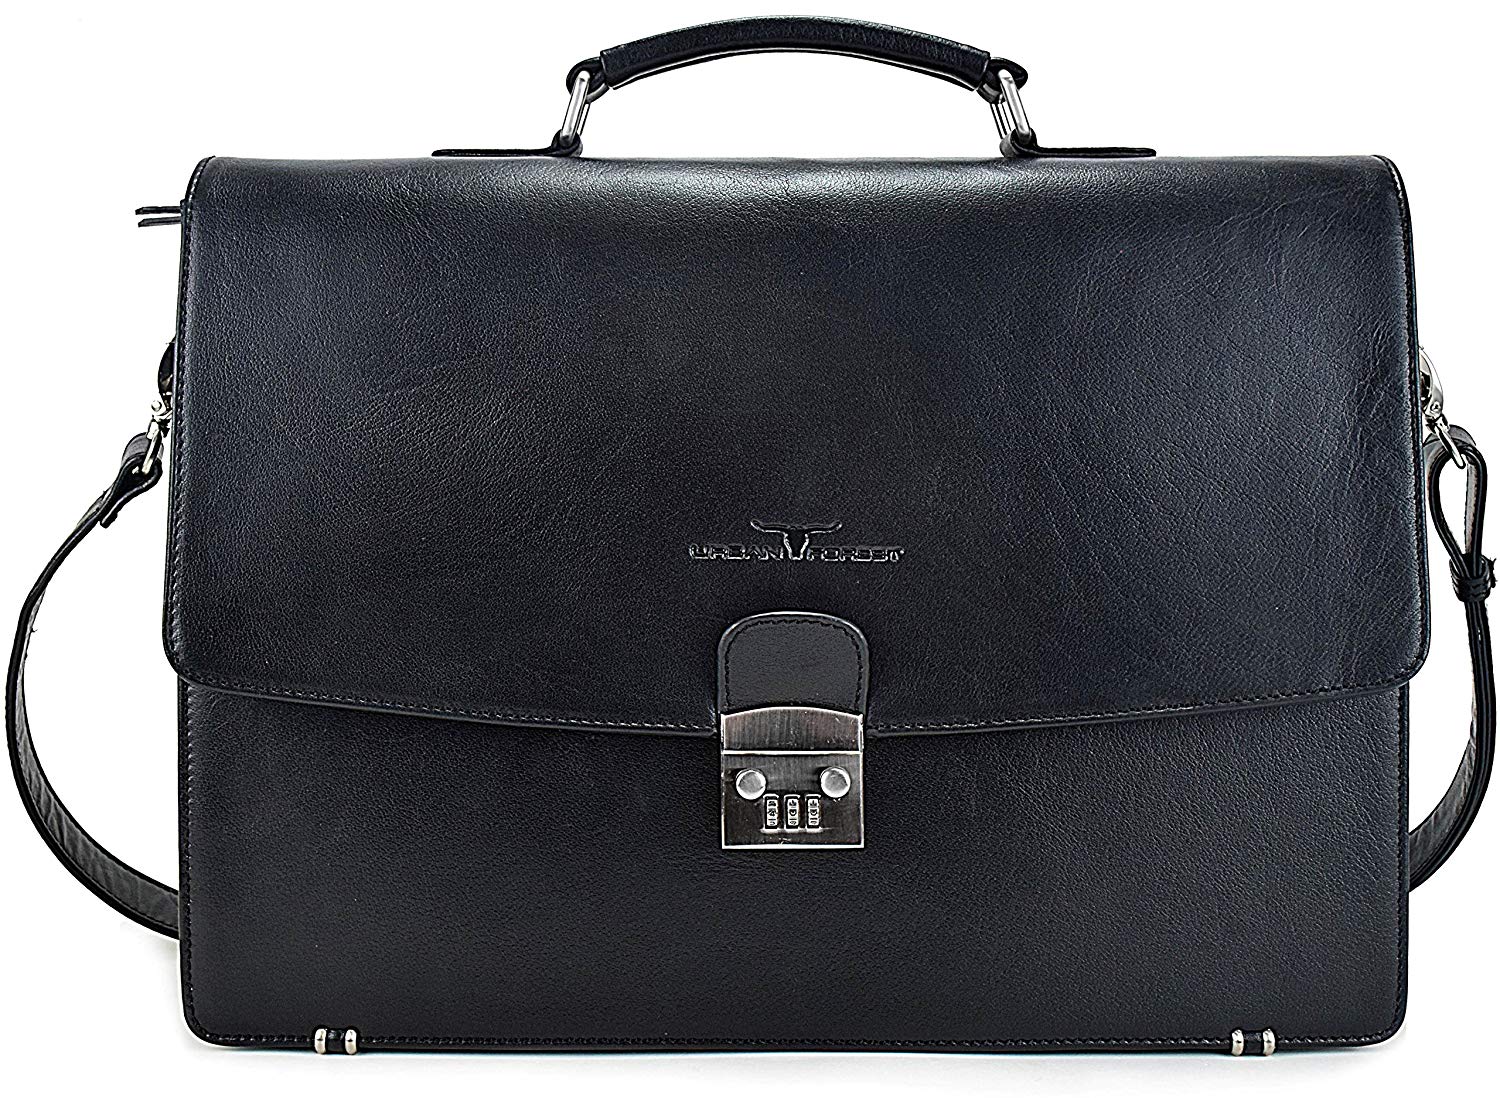 briefcase by Dolphin Leathers